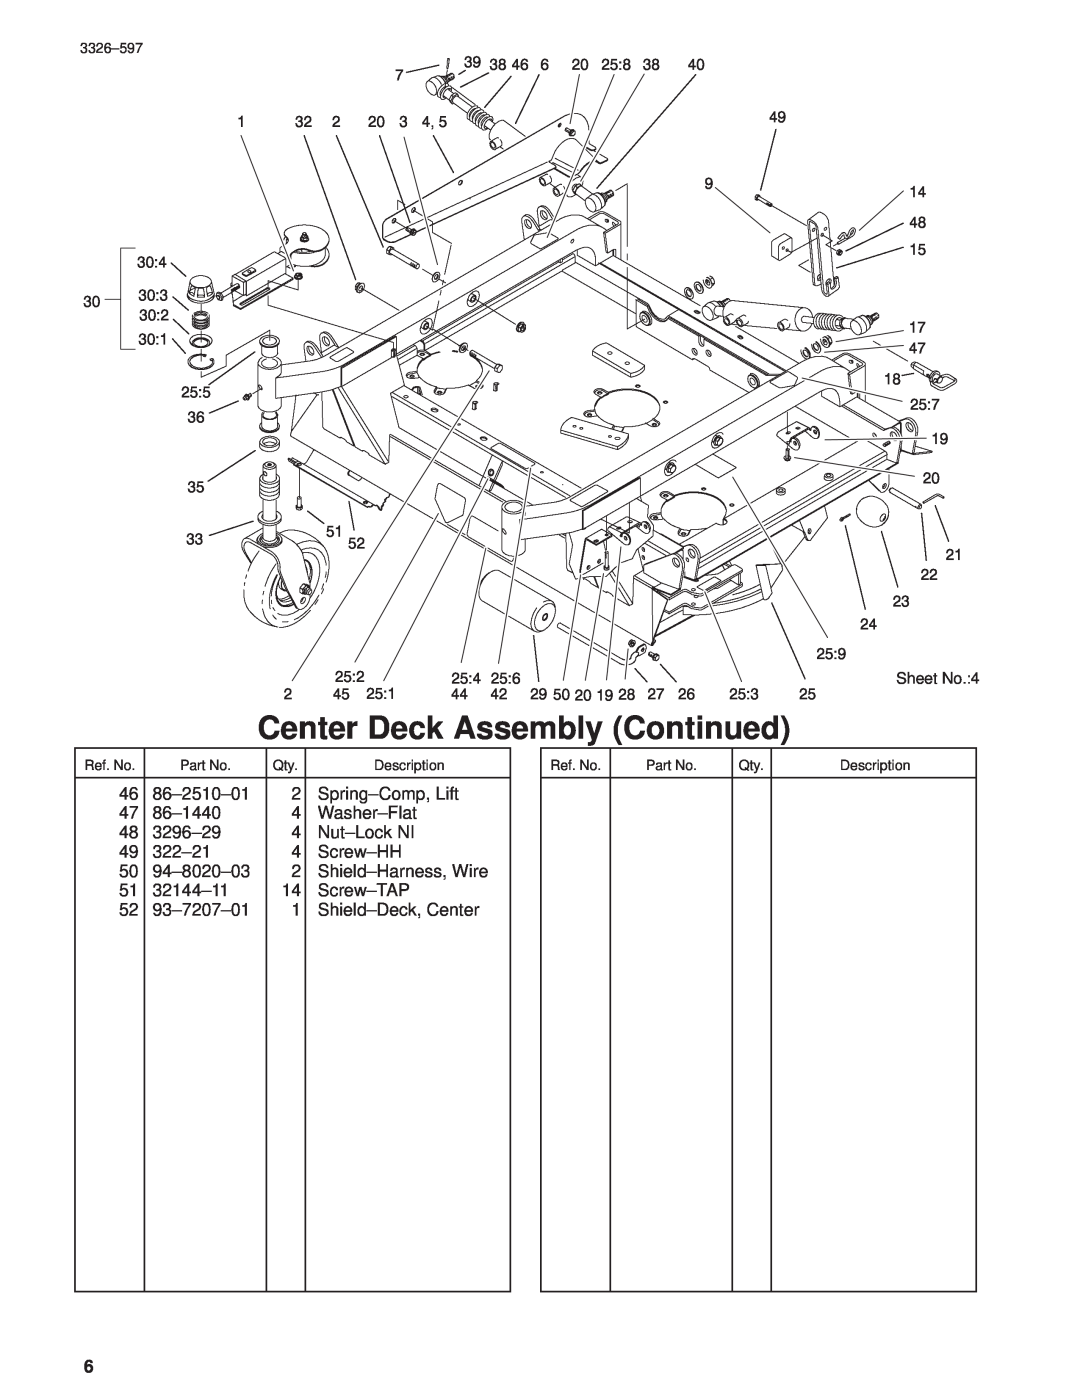 Toro 30402210000001 and Up manual Center Deck Assembly Continued 